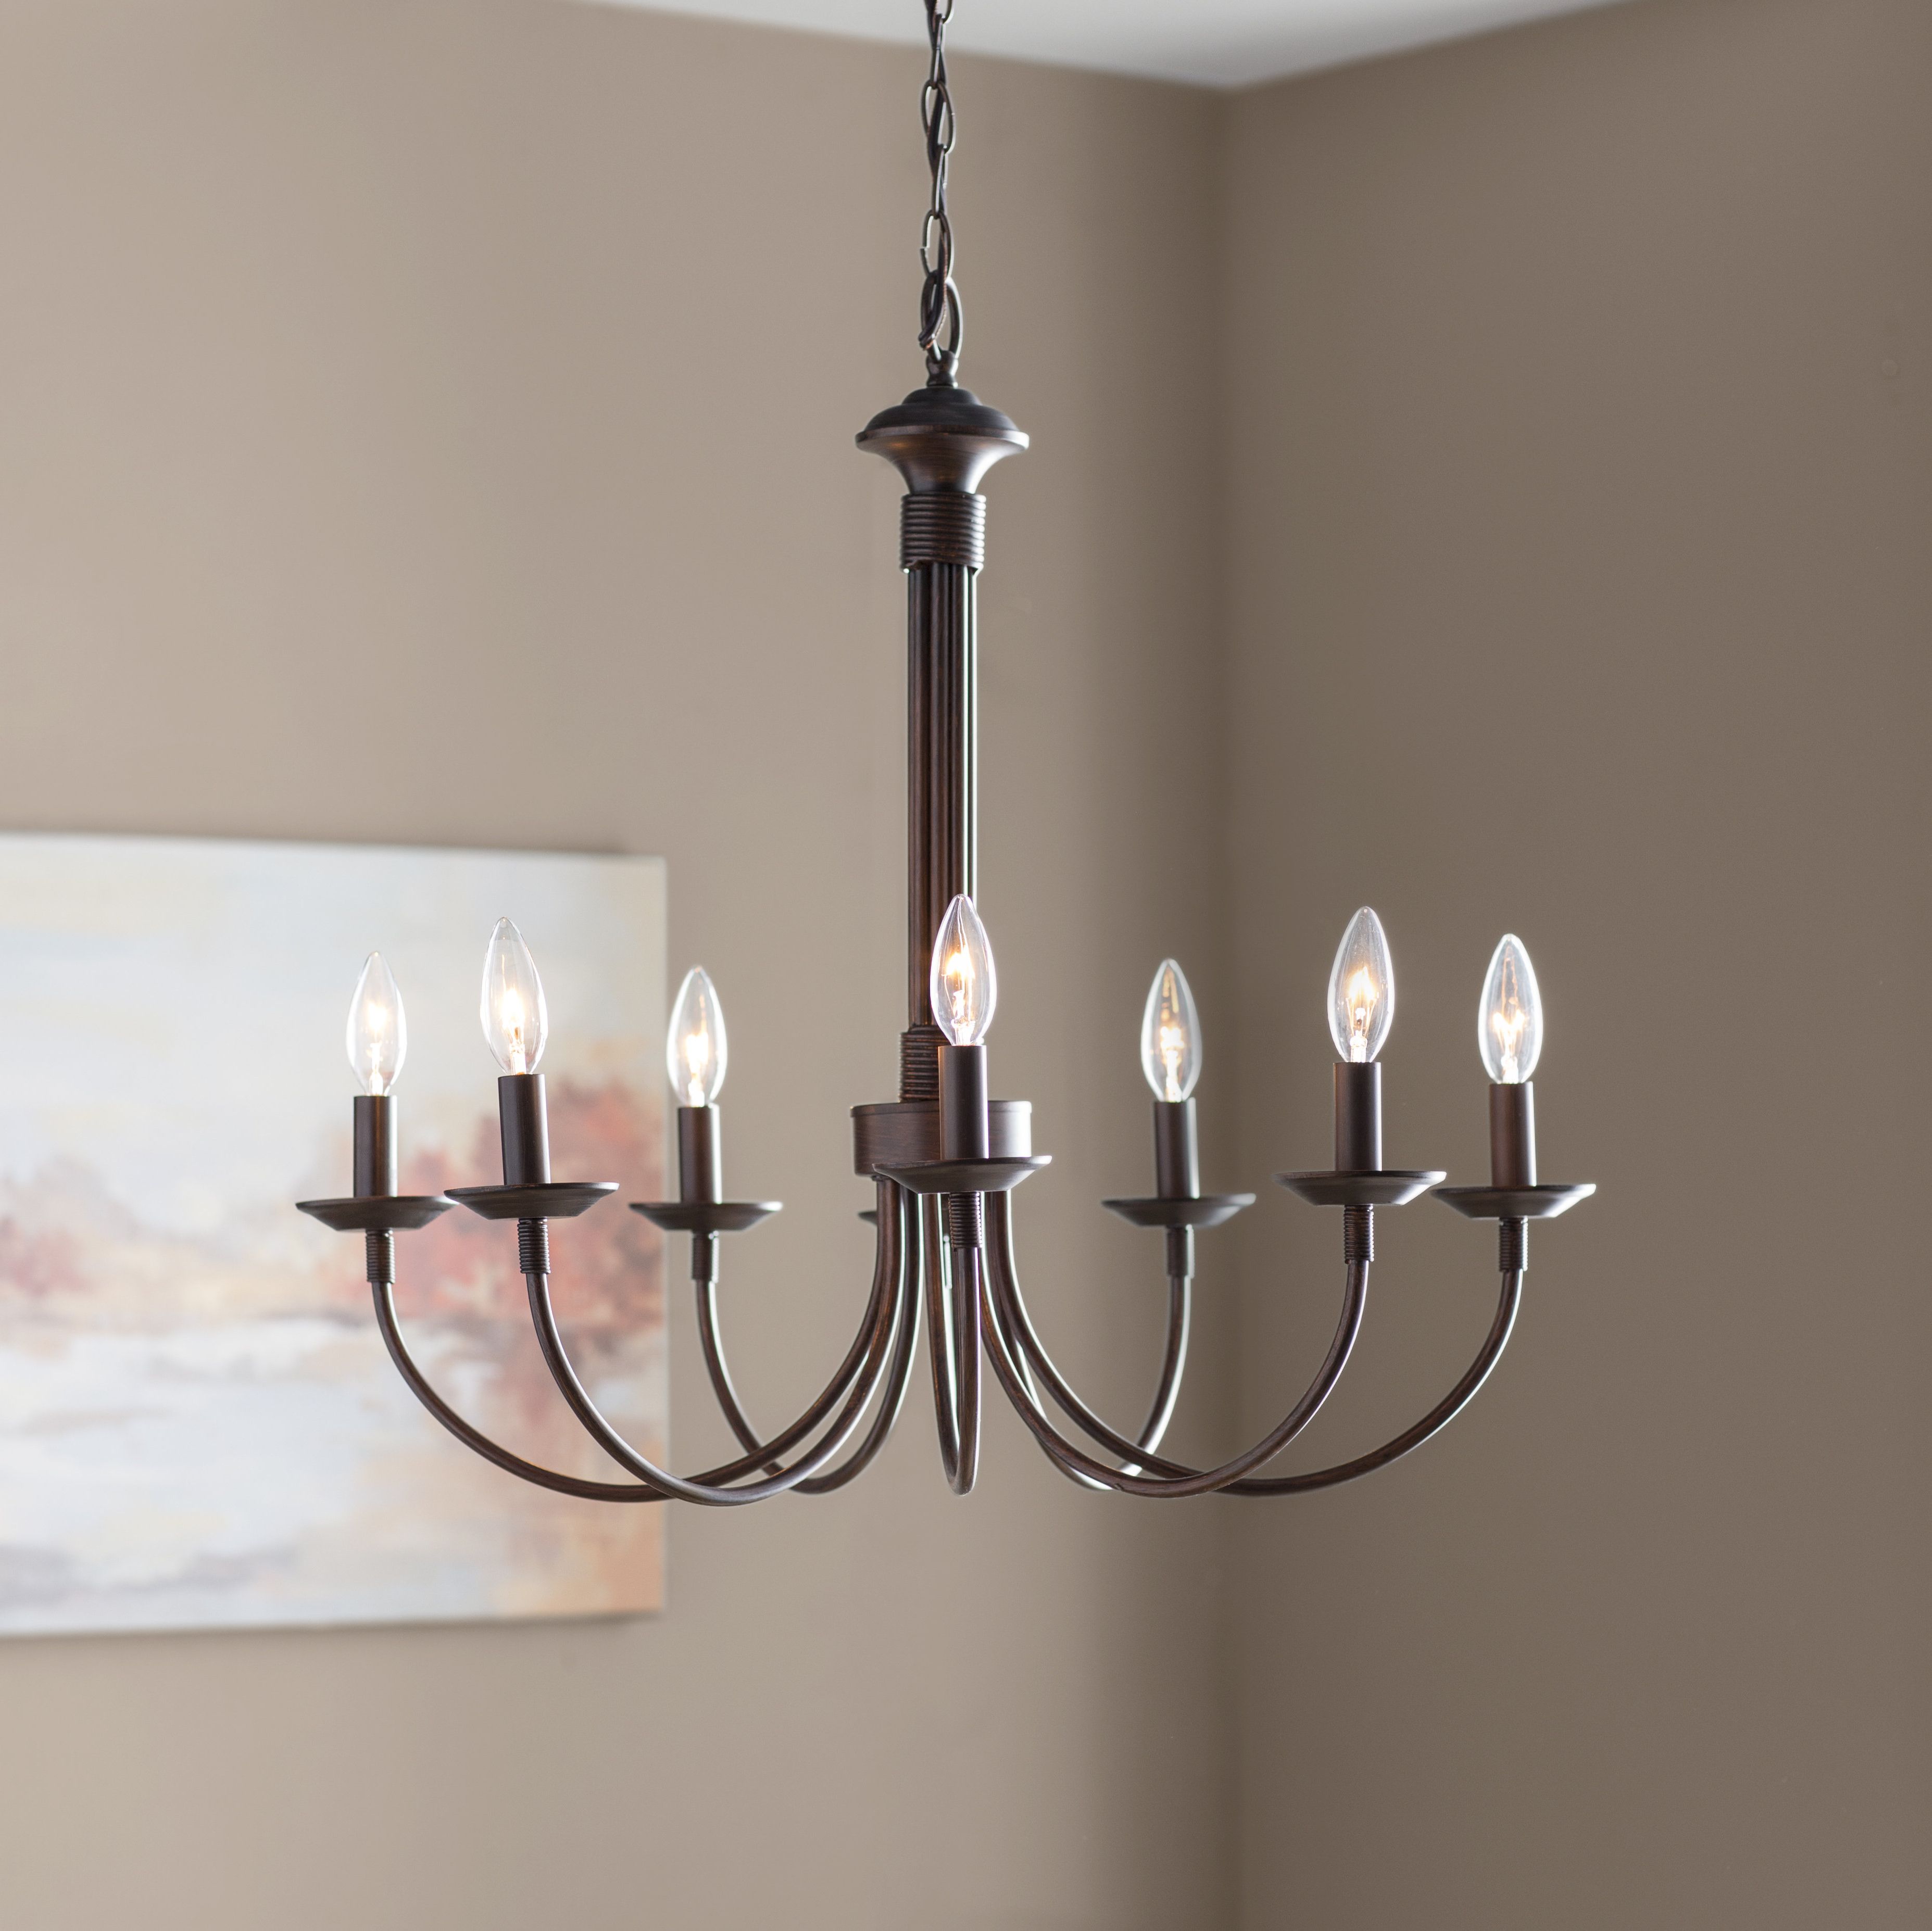 Most Current Hamza 6 Light Candle Style Chandeliers Within Shaylee 8 Light Candle Style Chandelier (View 11 of 25)